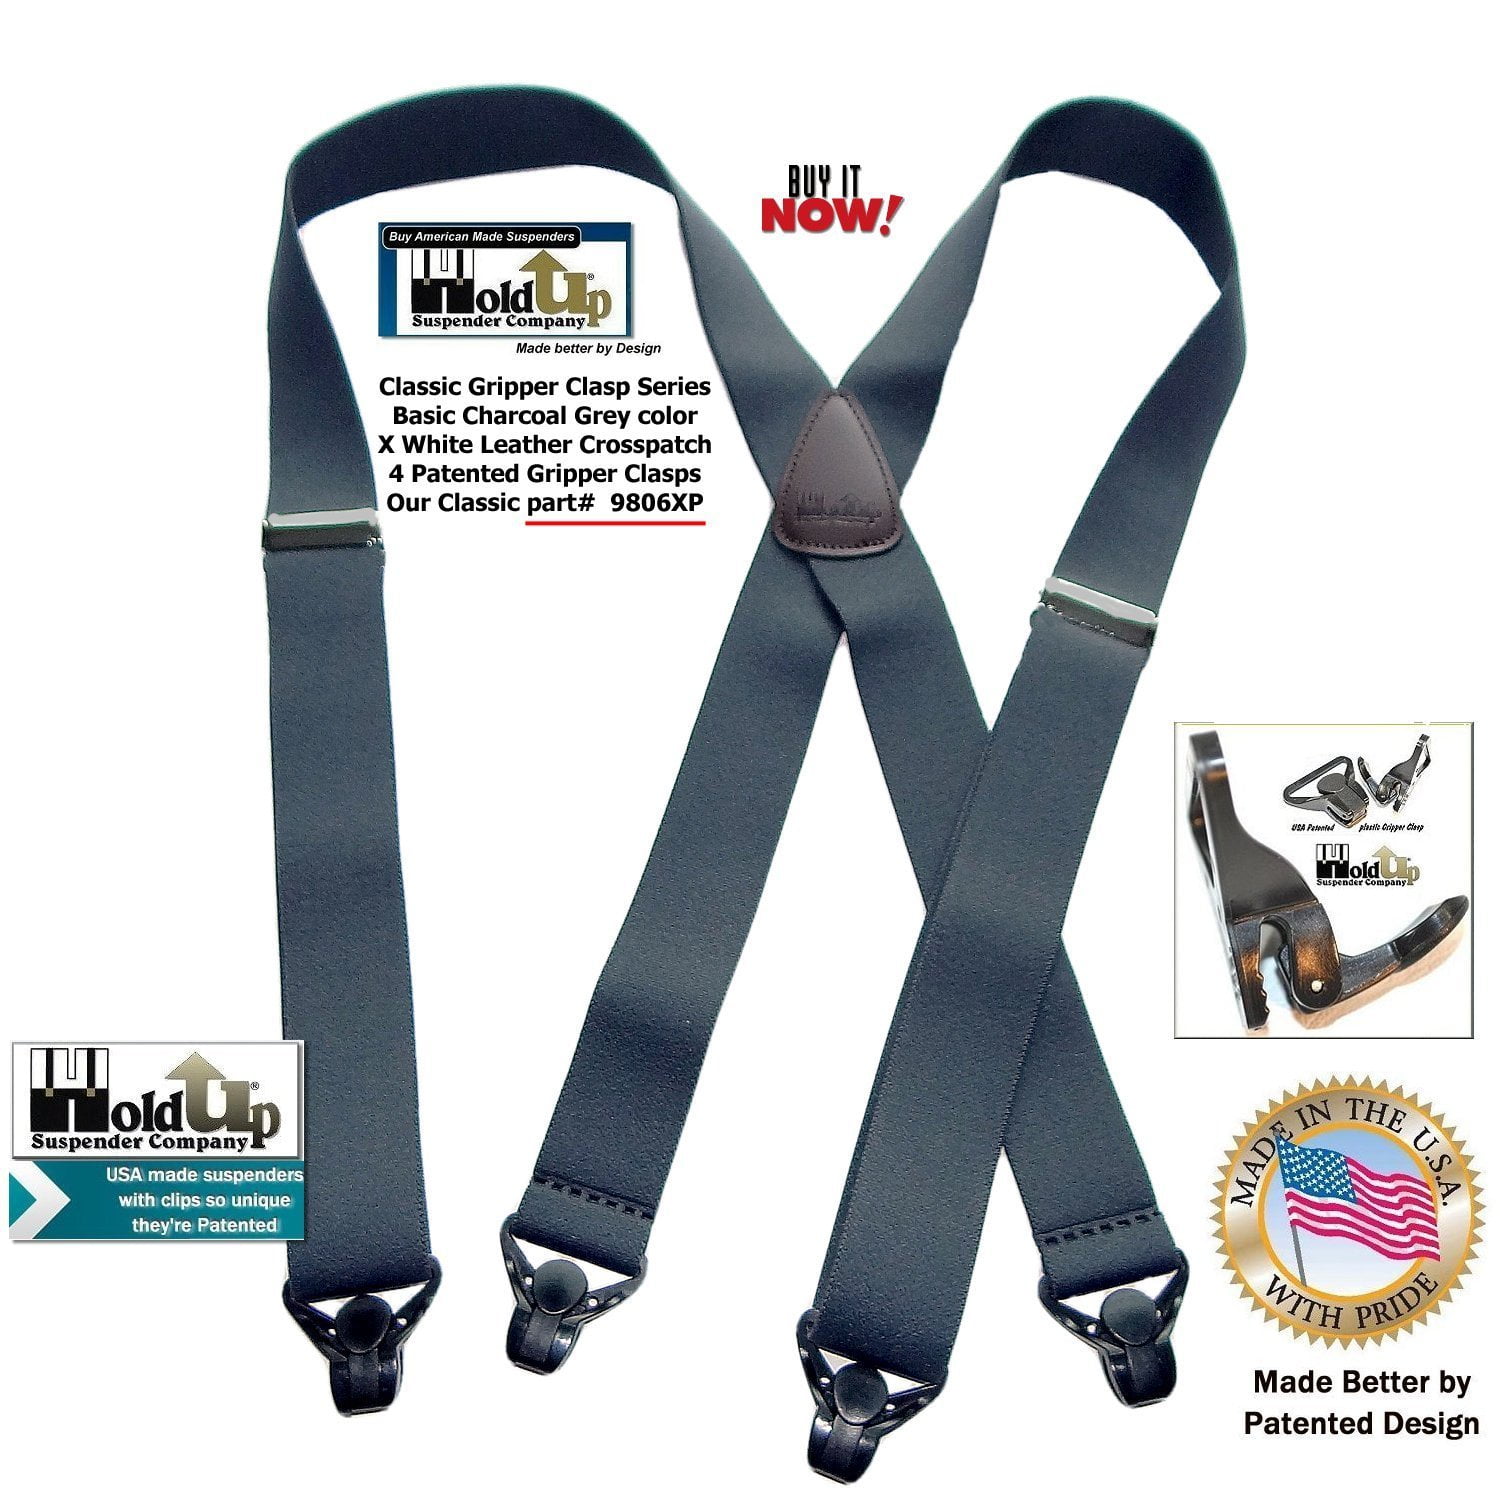 USA Made HoldUp Brand Ski-Ups series bright RED X-back Suspenders with Patented Black Gripper Clasps in 1 1/2 width 